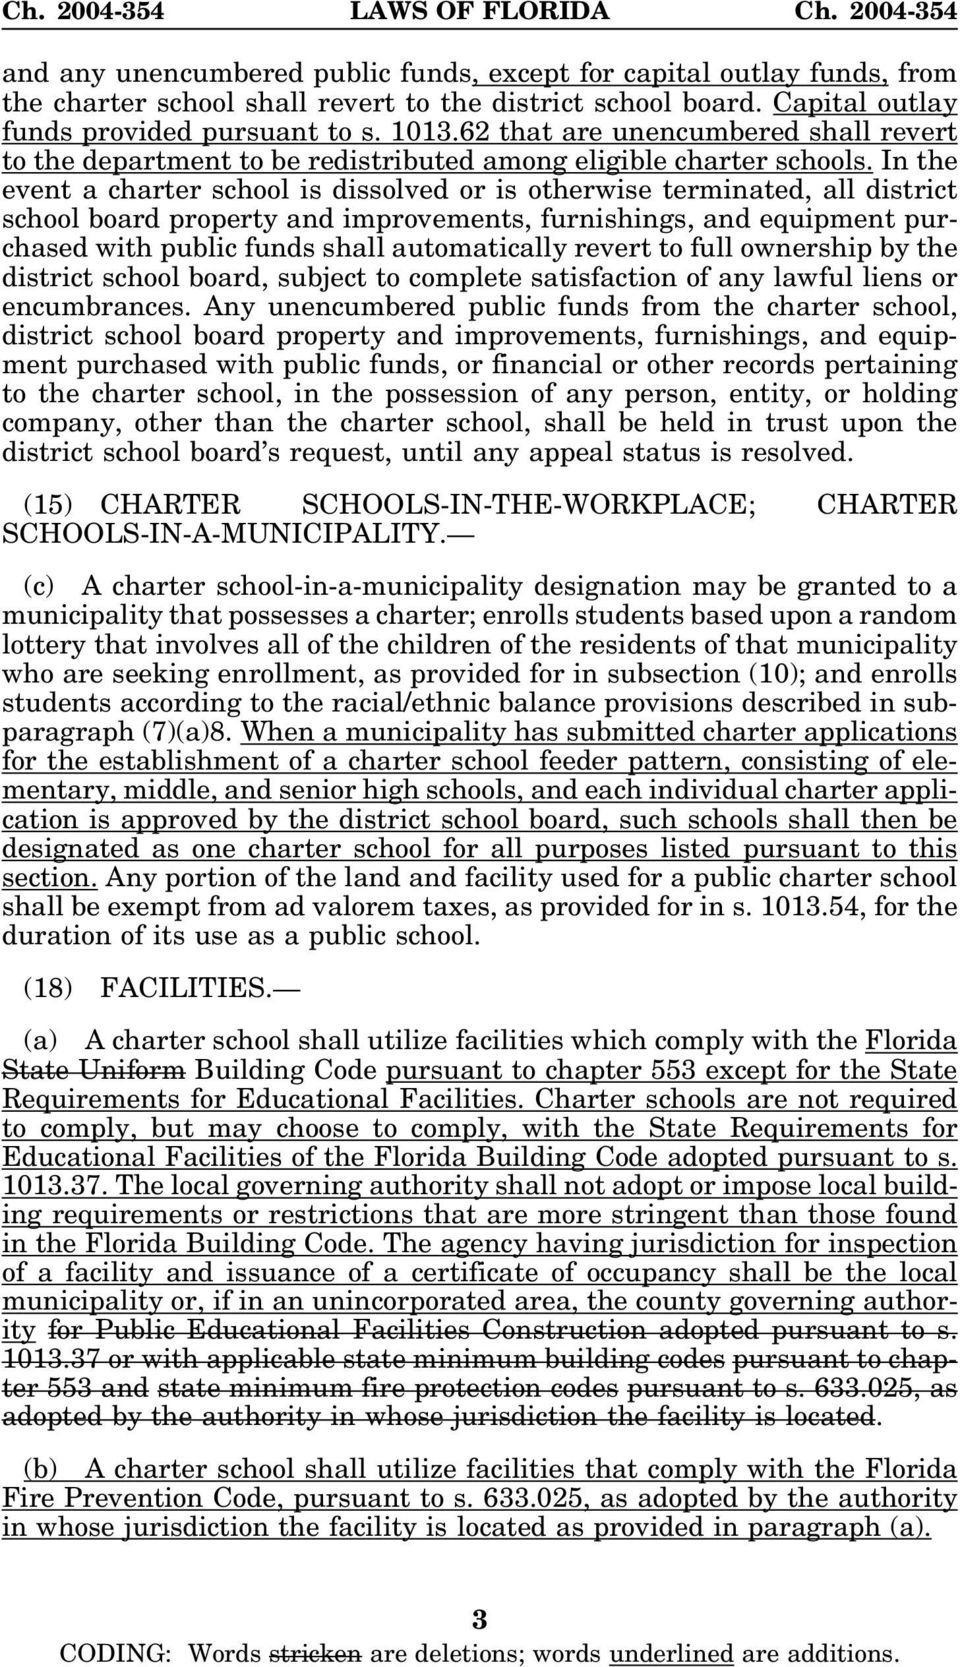 In the event a charter school is dissolved or is otherwise terminated, all district school board property and improvements, furnishings, and equipment purchased with public funds shall automatically